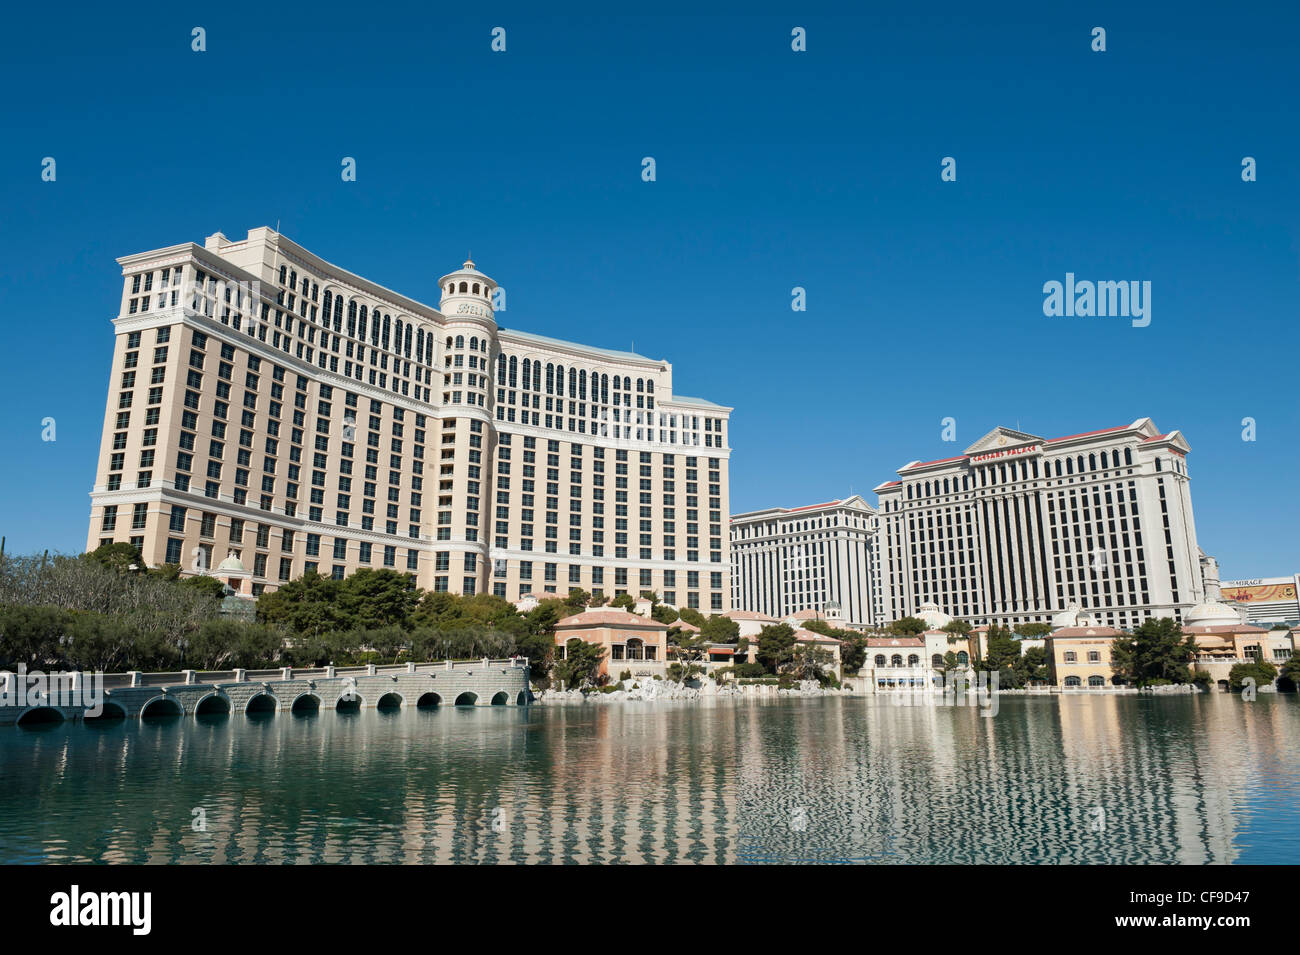 The Bellagio and Caesars Palace Luxury Hotels in Las Vegas, USA Stock Photo